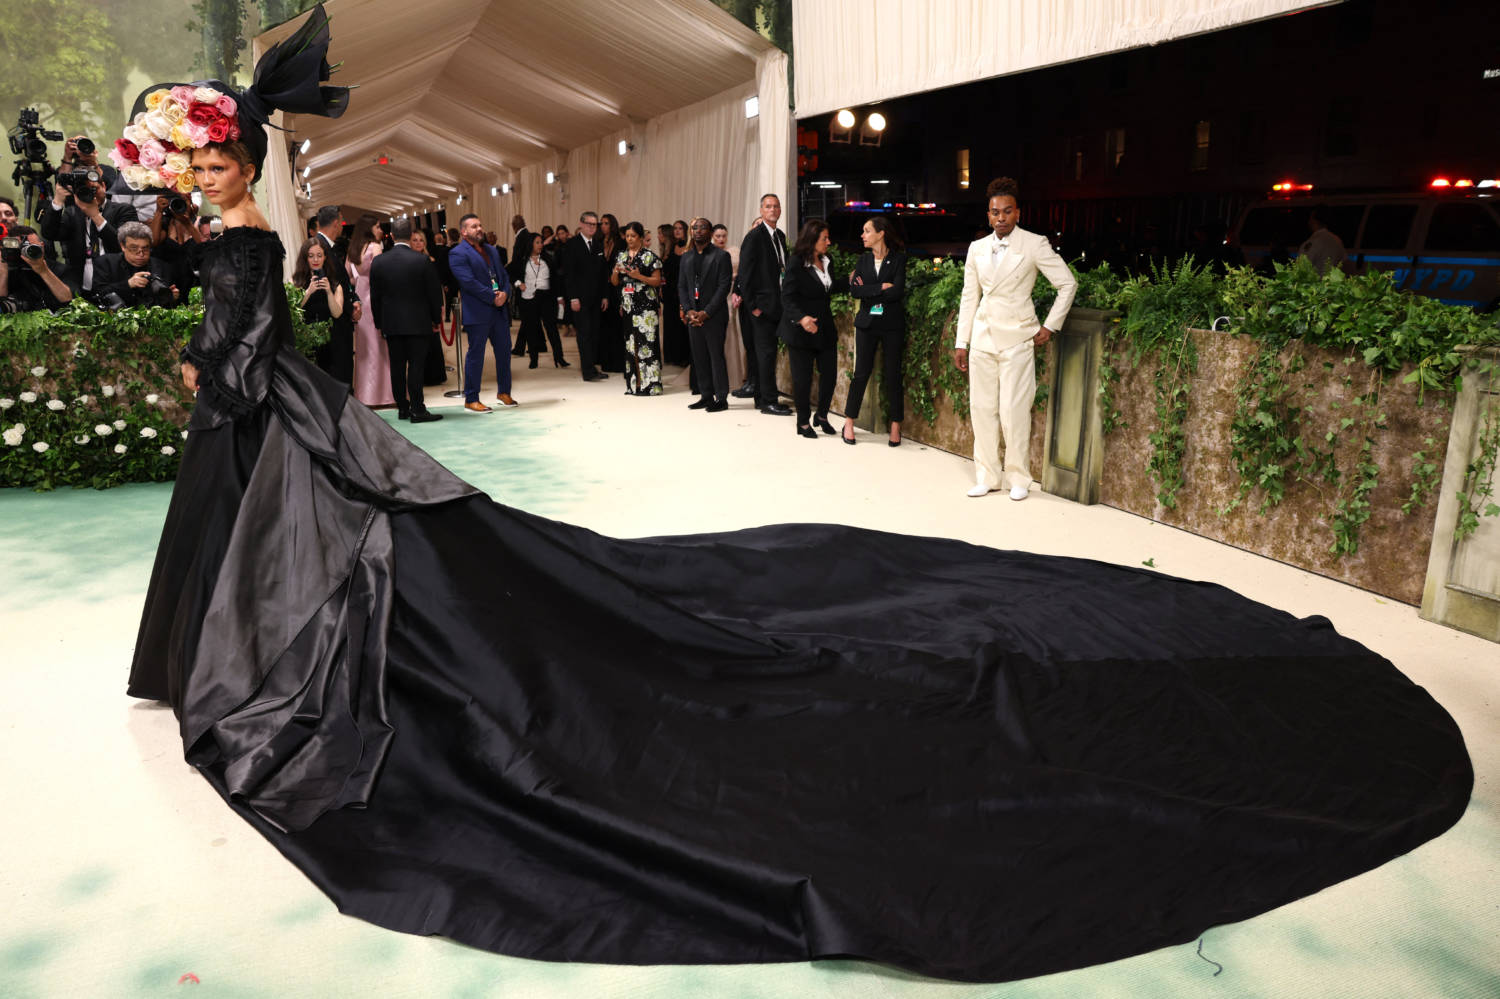 The Met Gala Red Carpet Arrivals In New York City